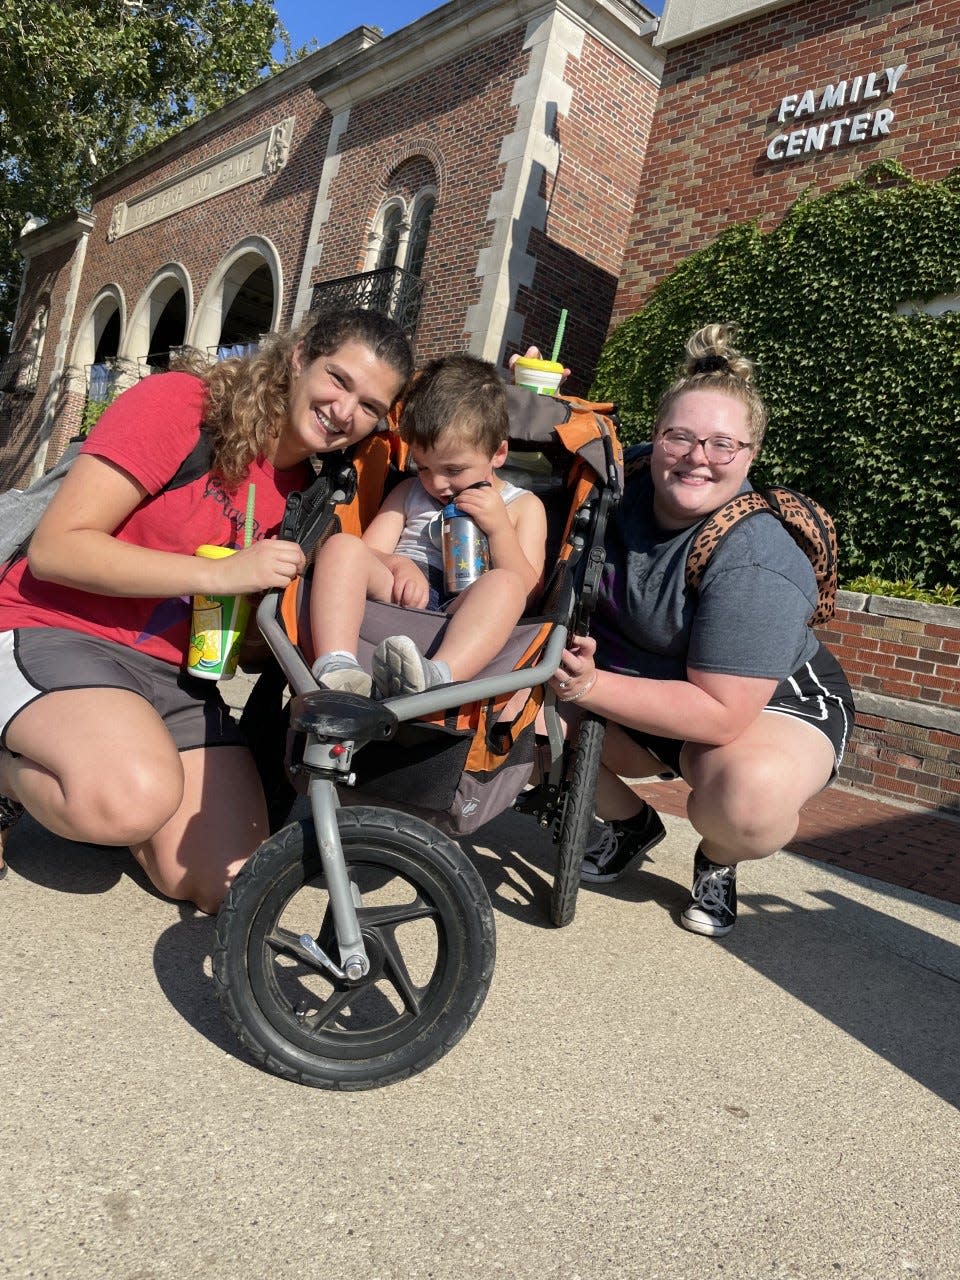 Cassi Walker of Indianola (left) explores the Iowa State Fair during sensory friendly morning Aug. 17 with her son, Raymond Walker, and friend Elizabeth Olsen of Des Moines.